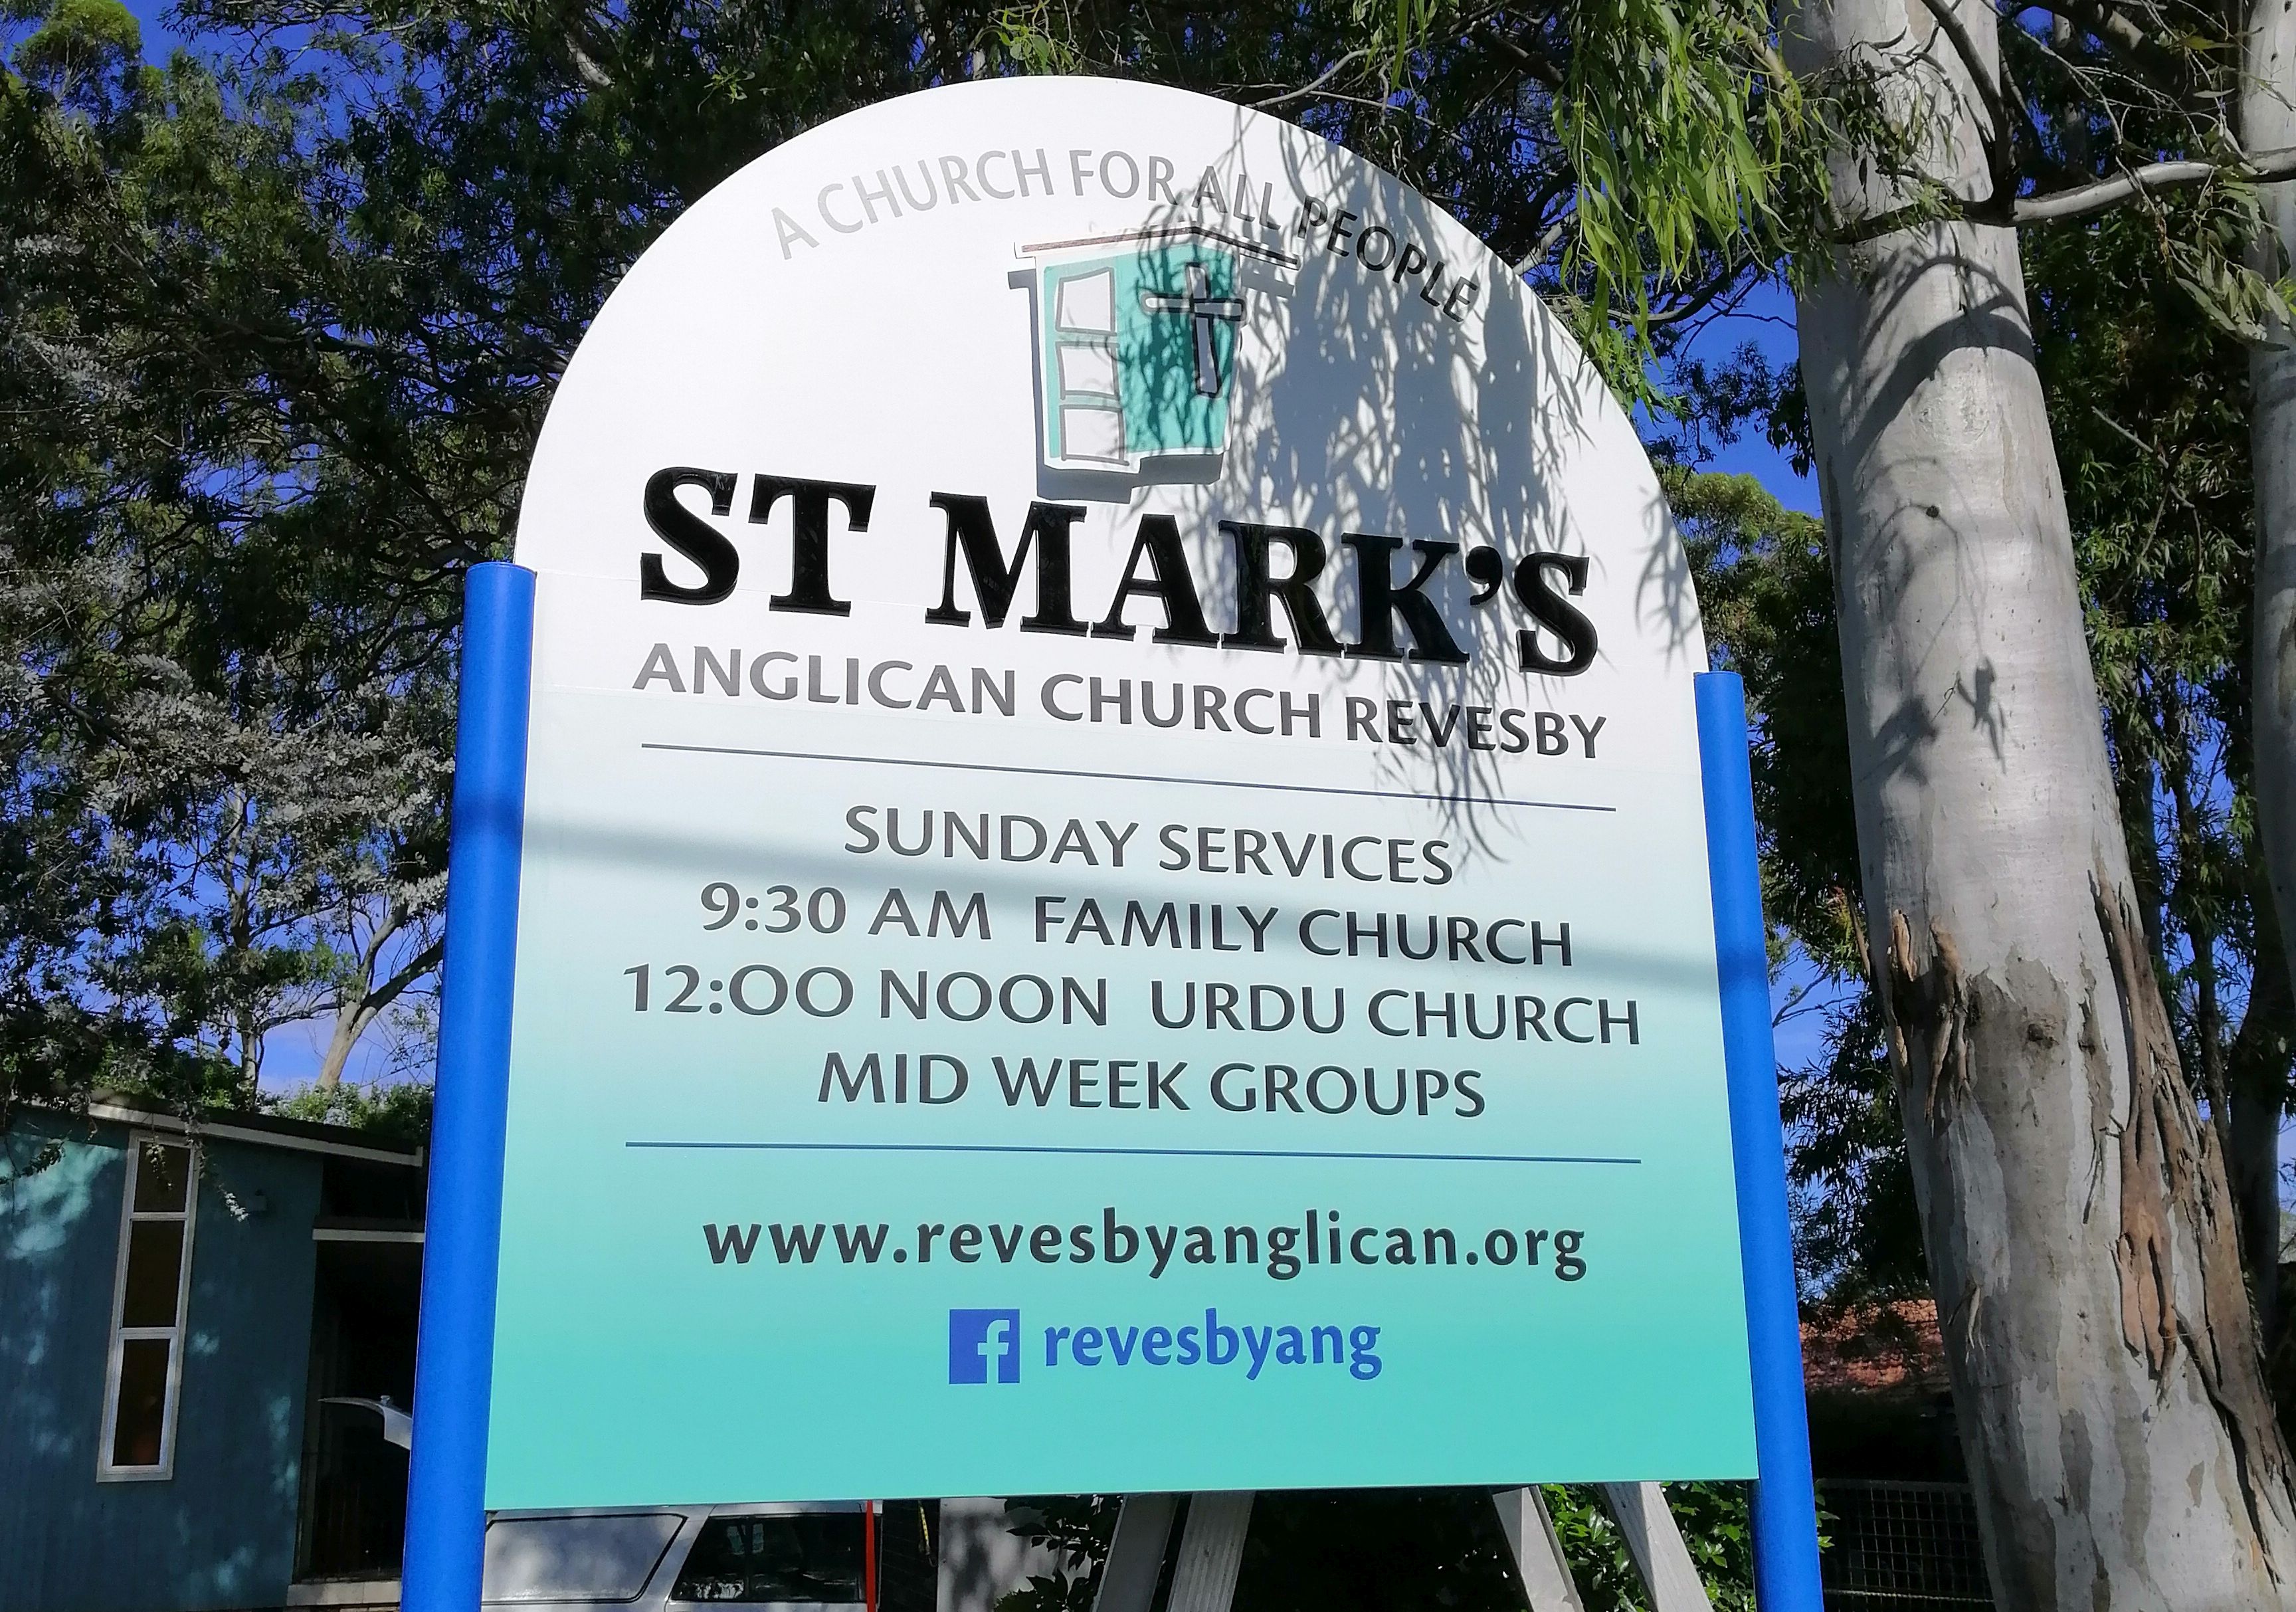 ACM SIGN ON POLES FOR ST MARKS REVESBY